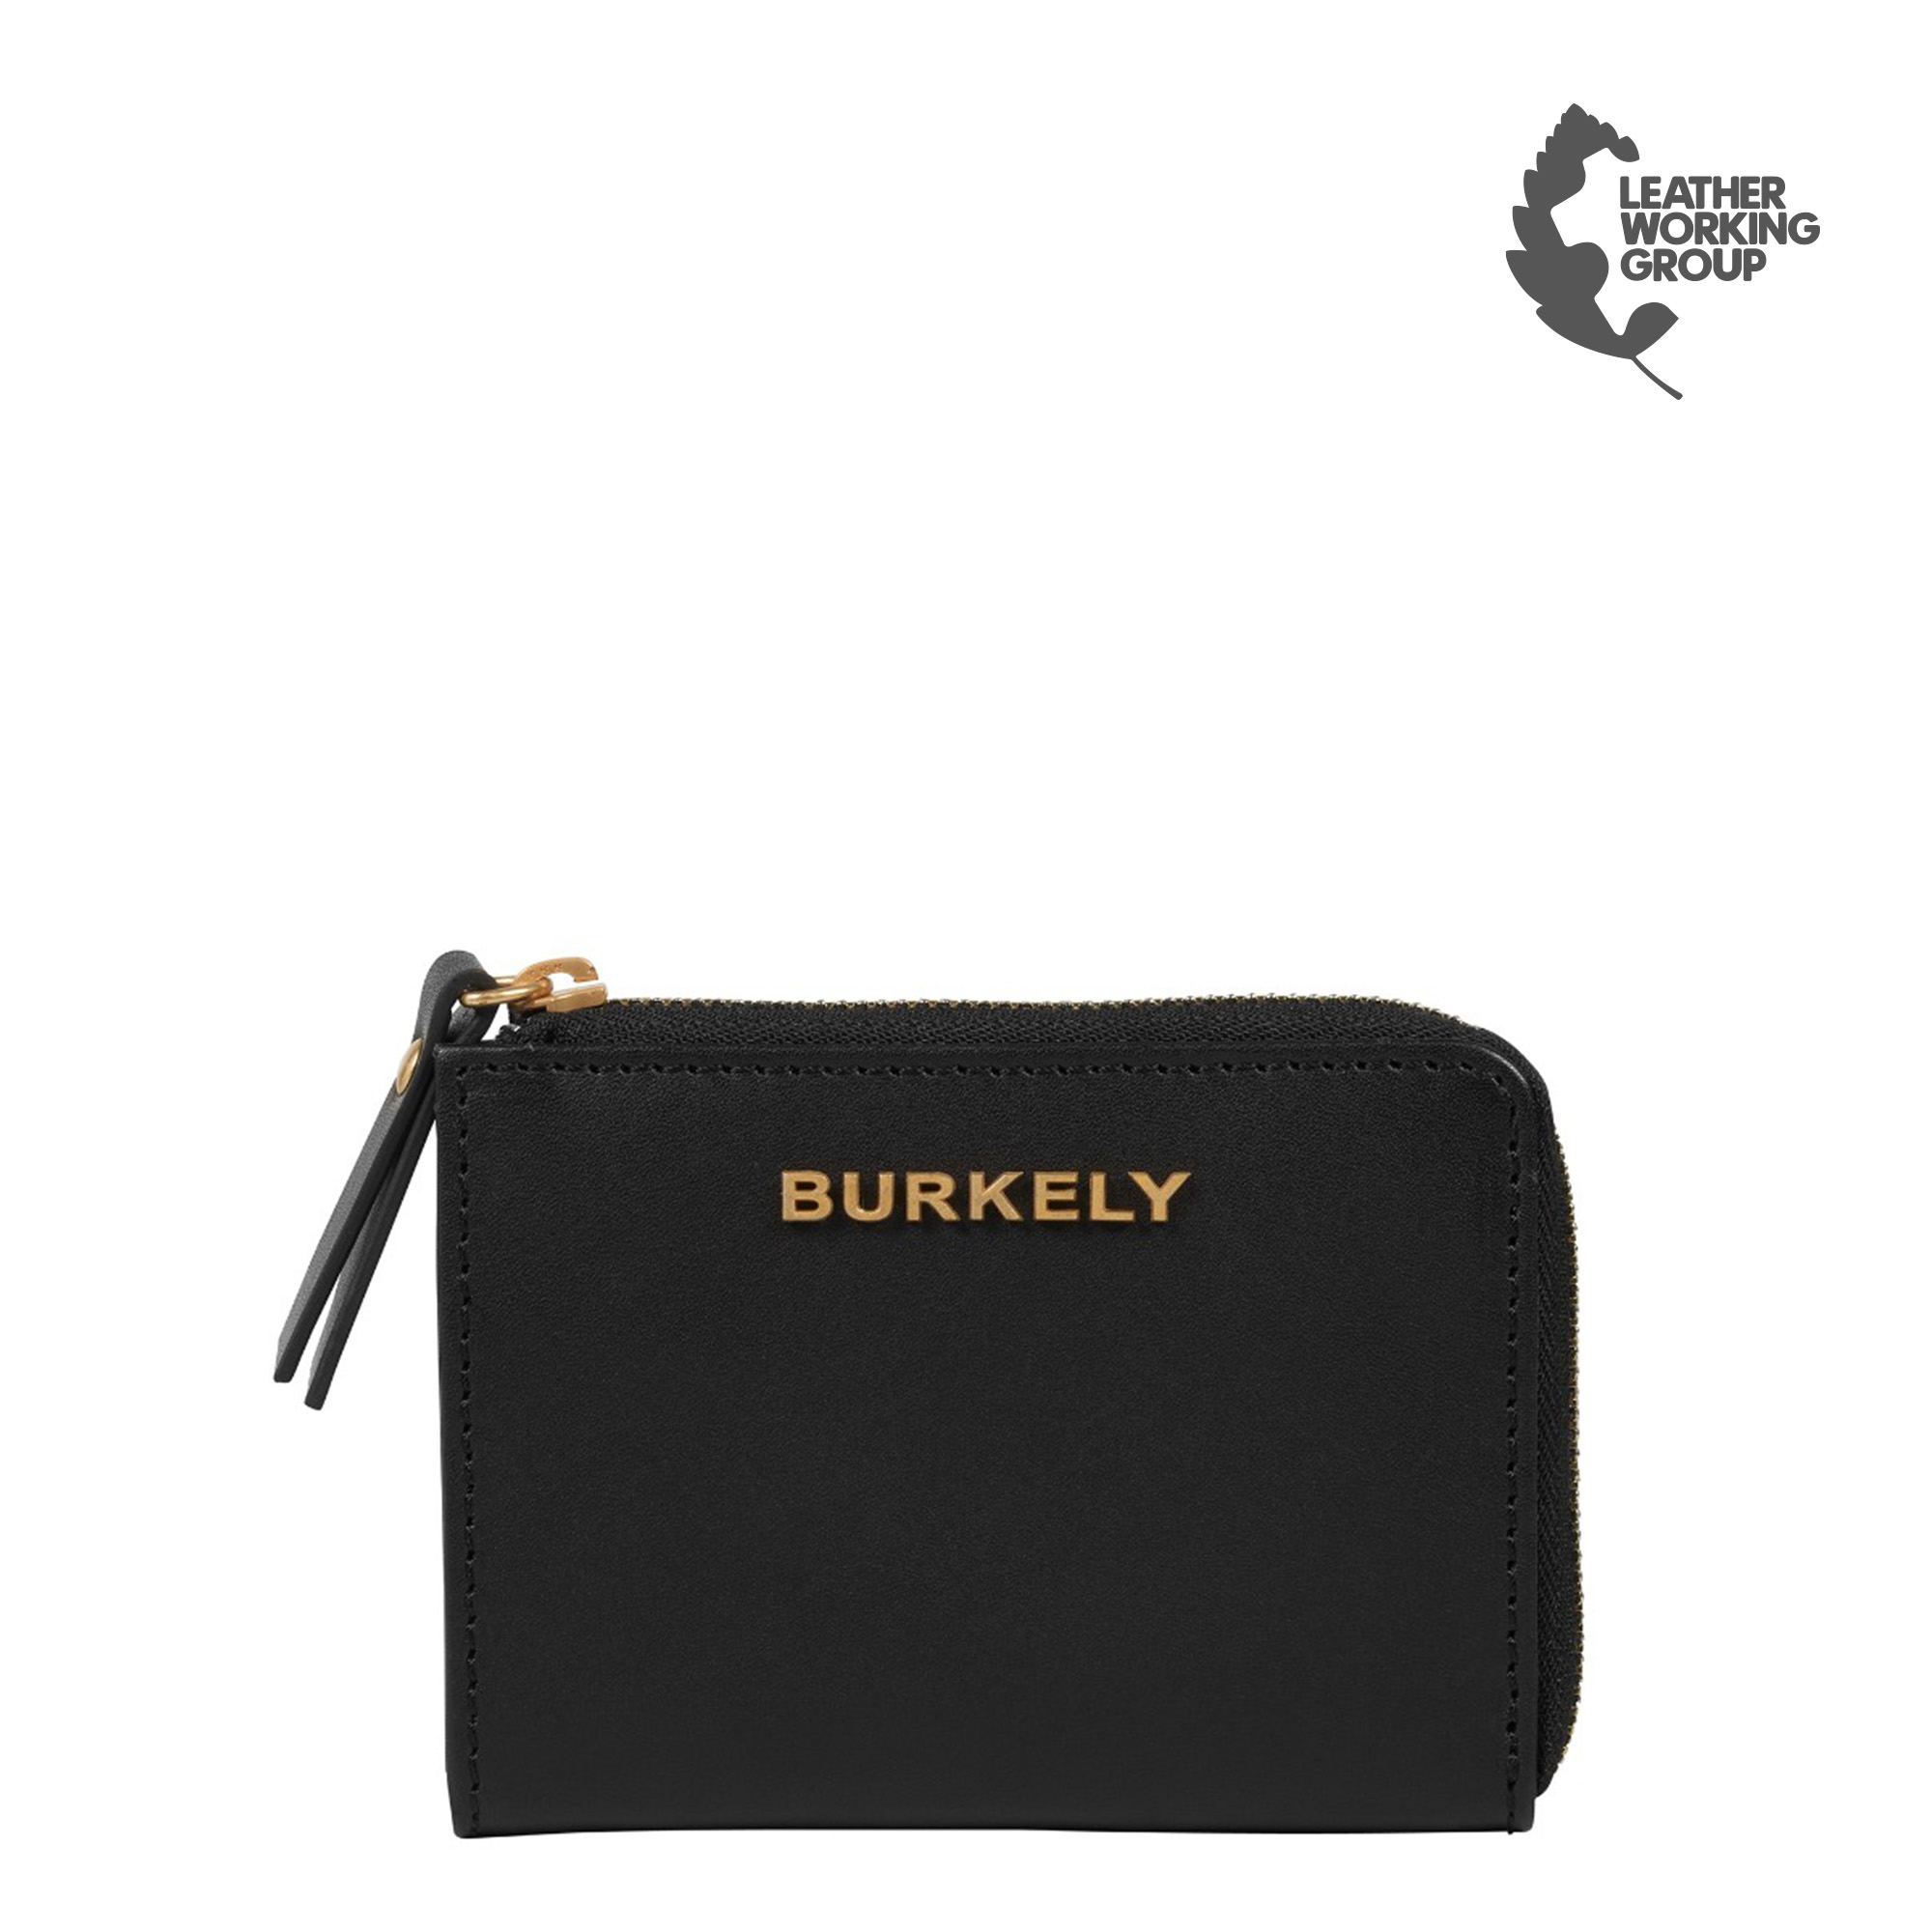 BURKELY FUNDAMENTALS ANTIQUE AVERY TOILETRY BAG